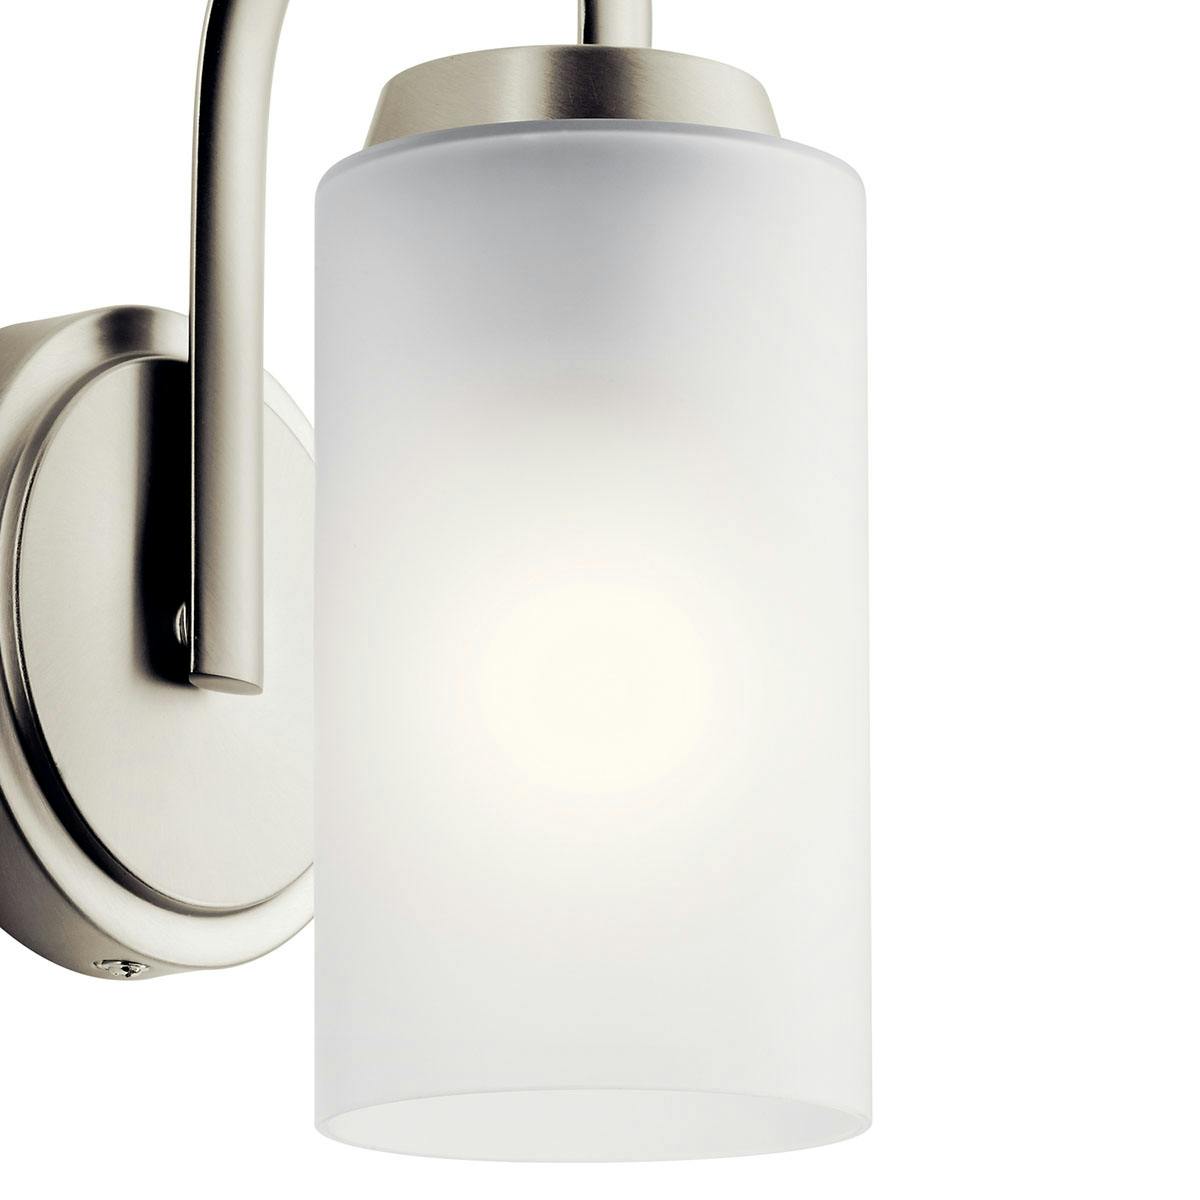 Close up view of the Kennewick 1 Light Sconce Nickel on a white background